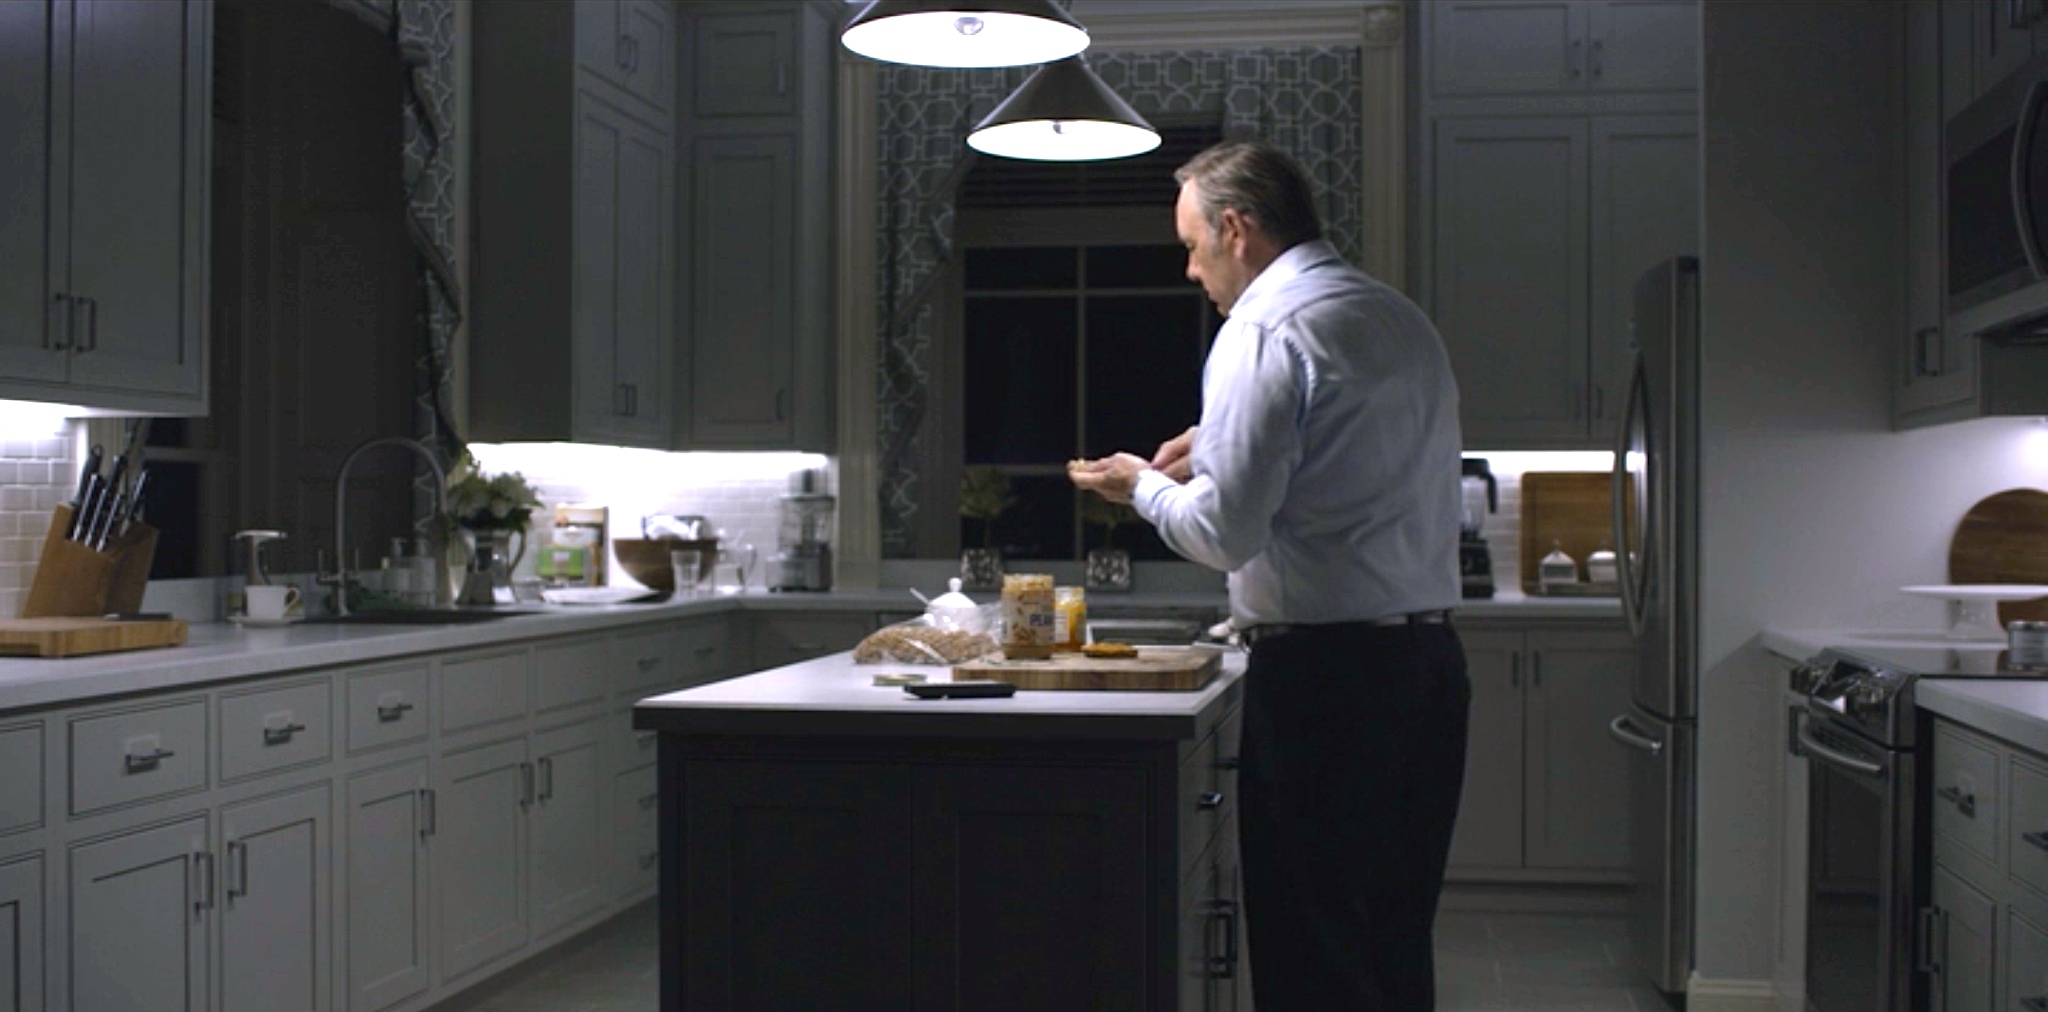 house of cards kitchen design